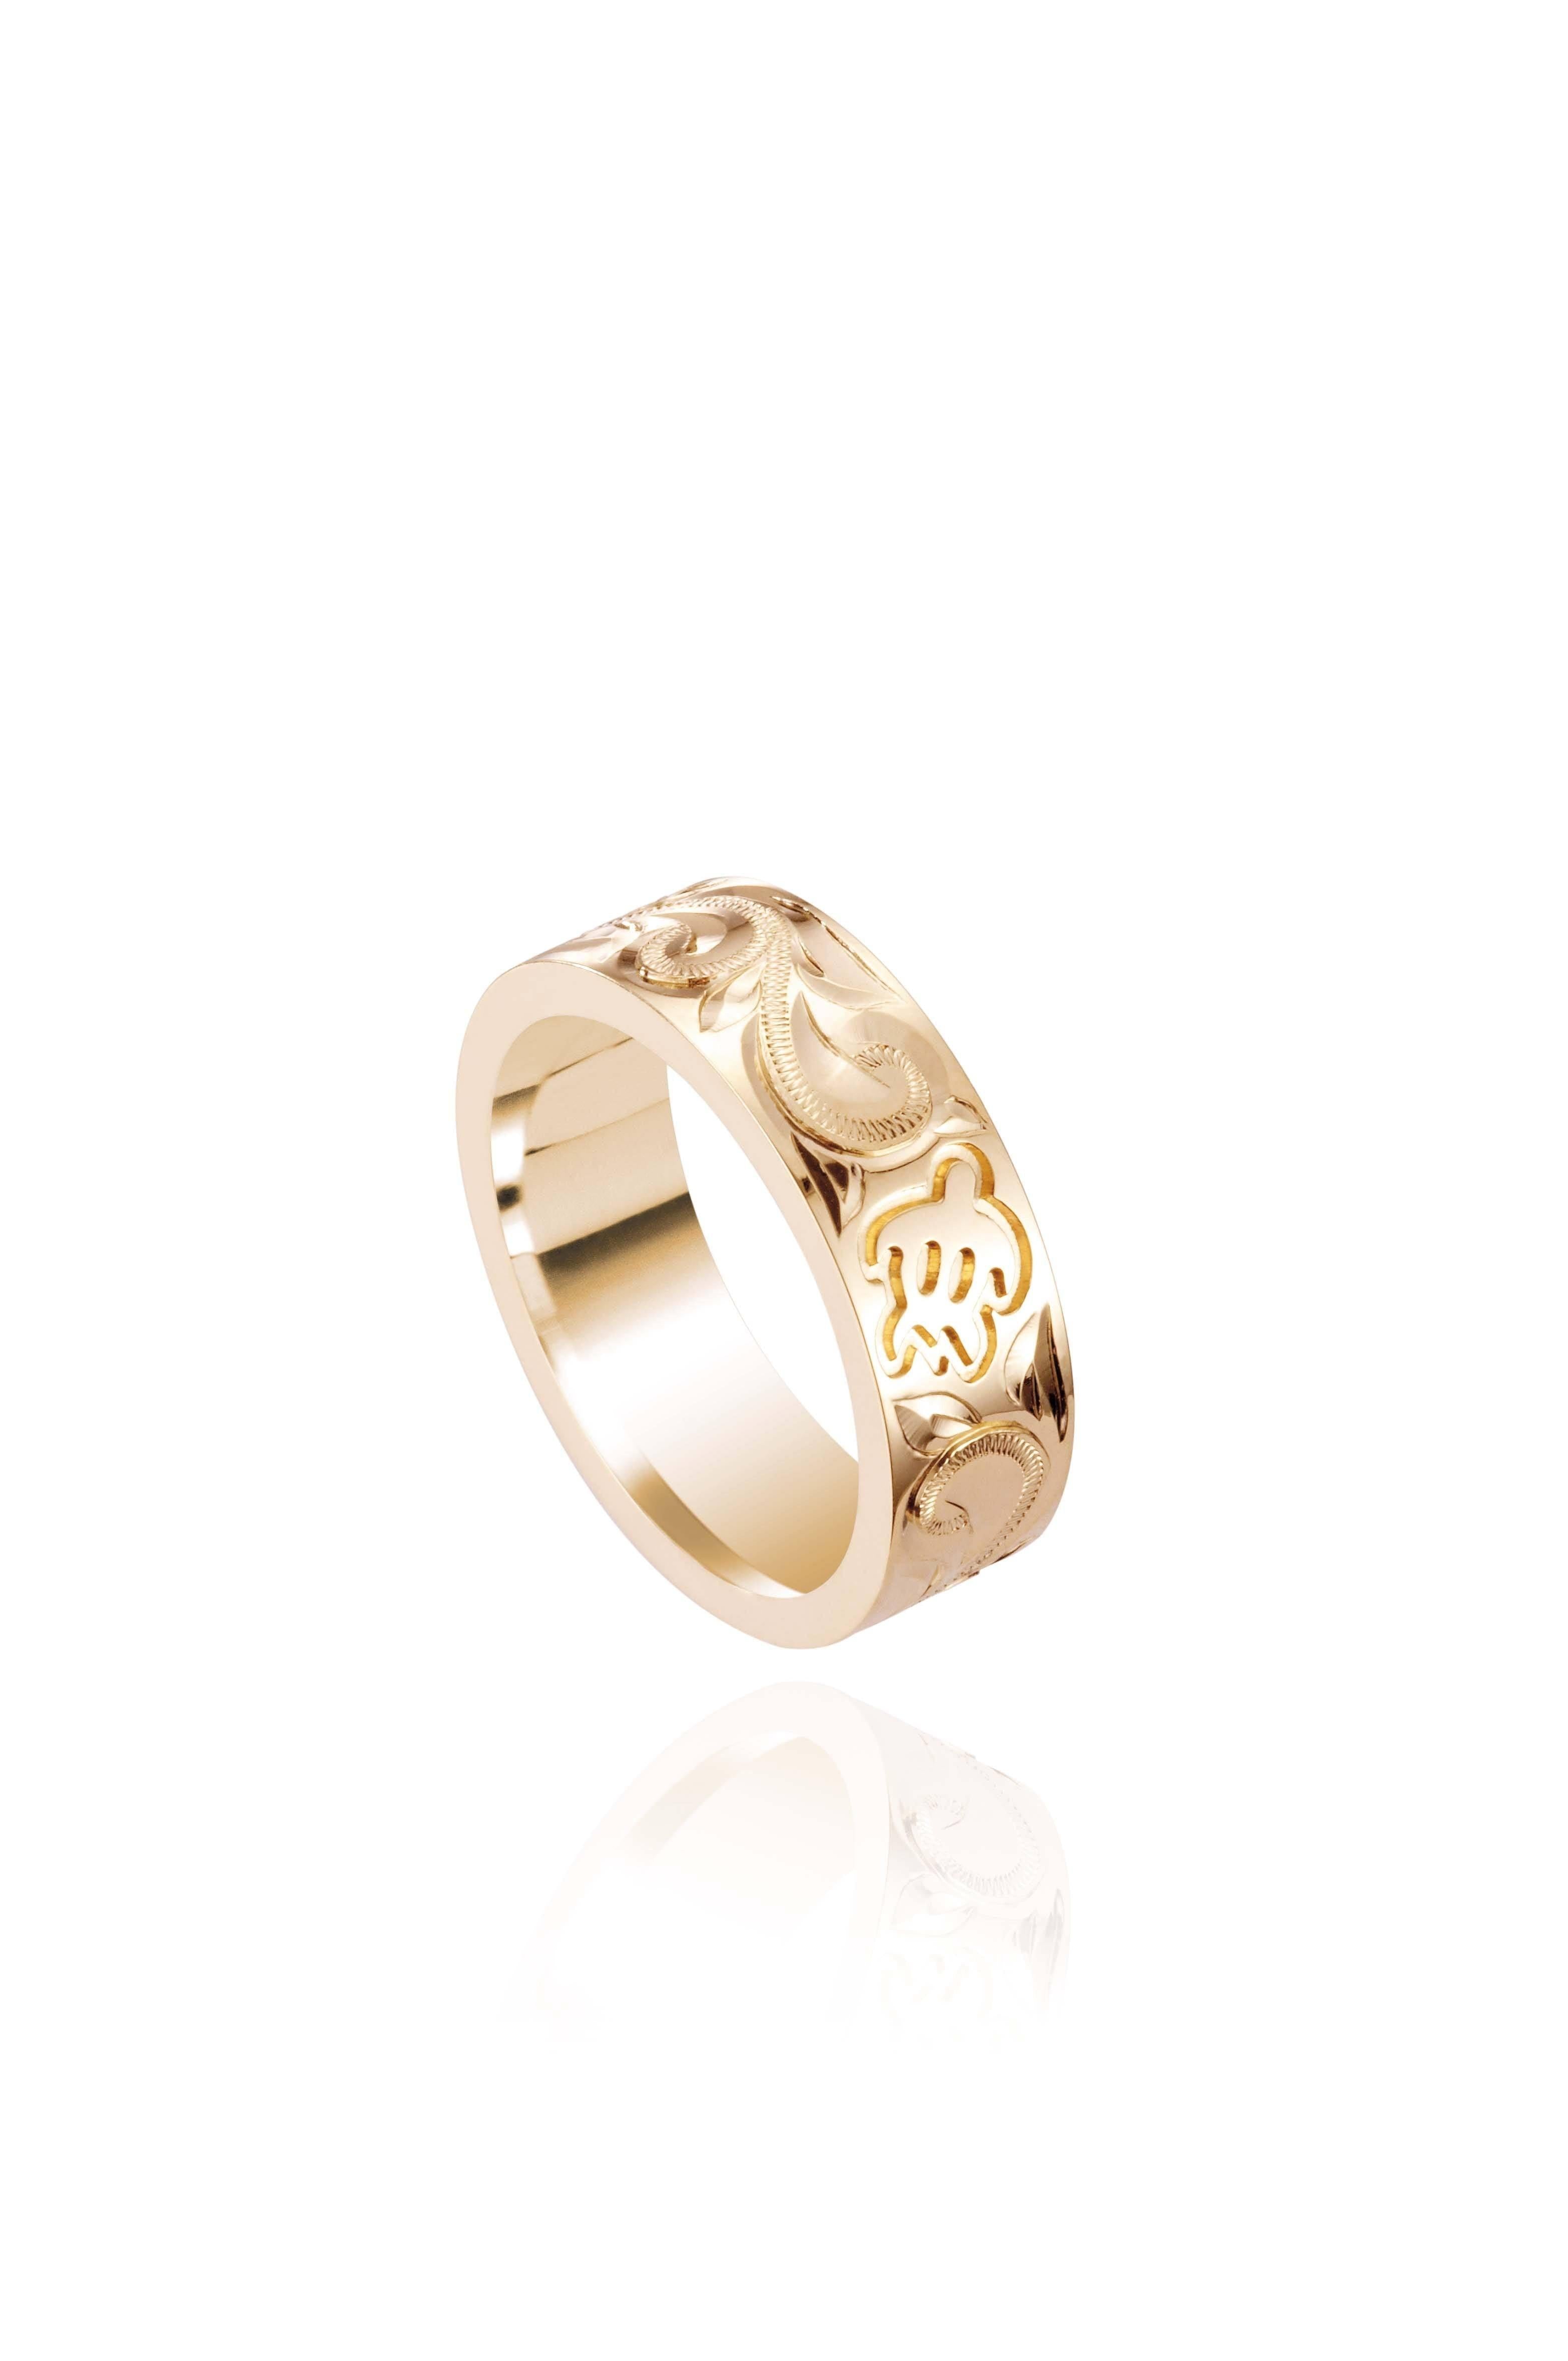 The photo shows a 6 mm 14K yellow gold ring with hand engravings including sea turtles.